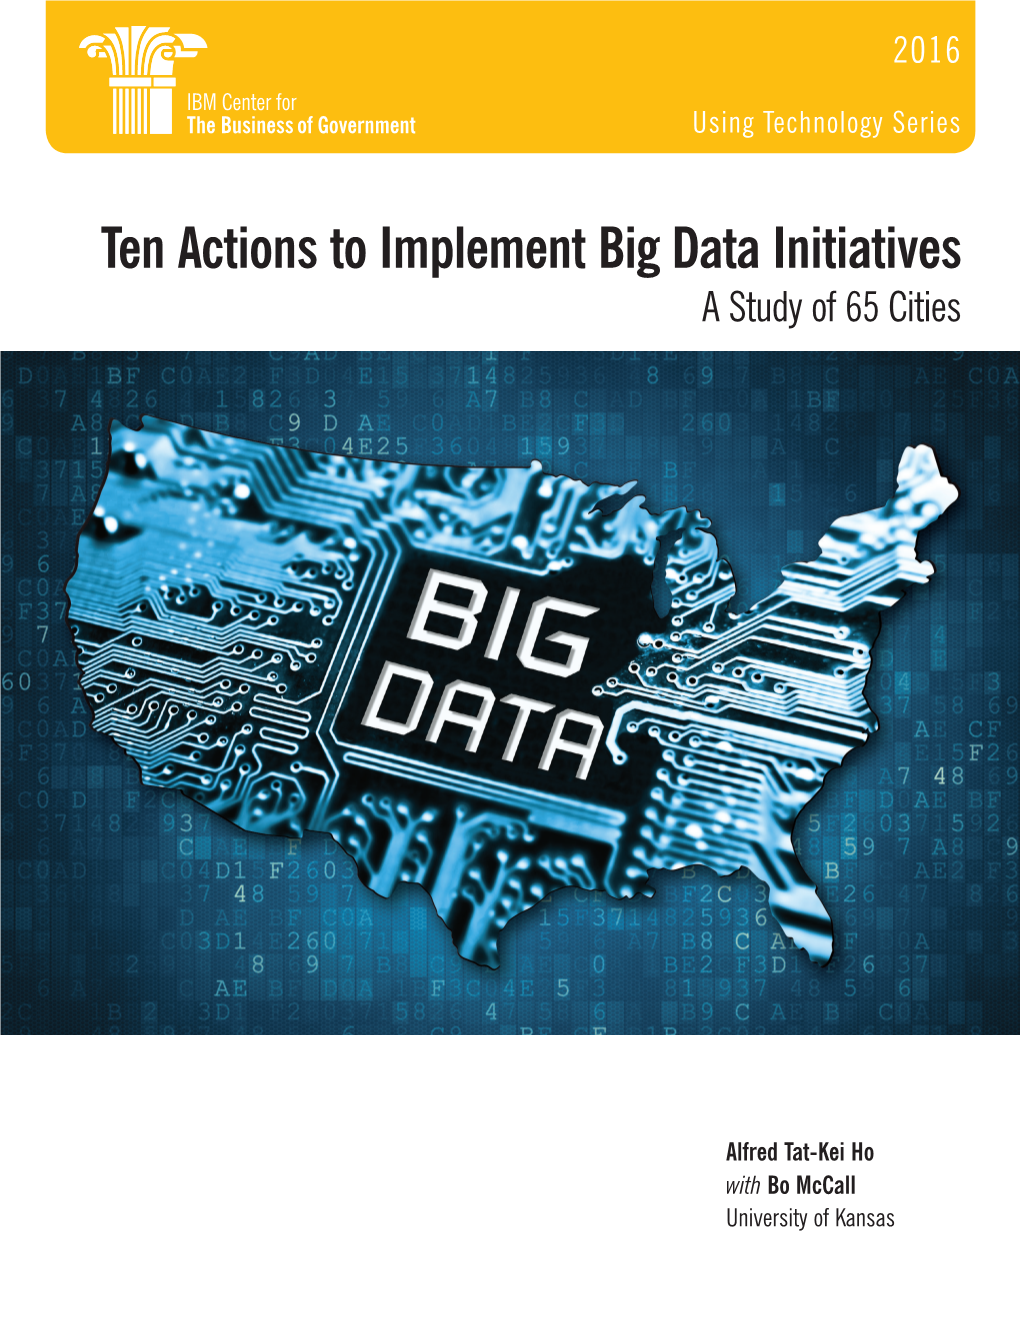 Ten Actions to Implement Big Data Initiatives: a Study of 65 Cities